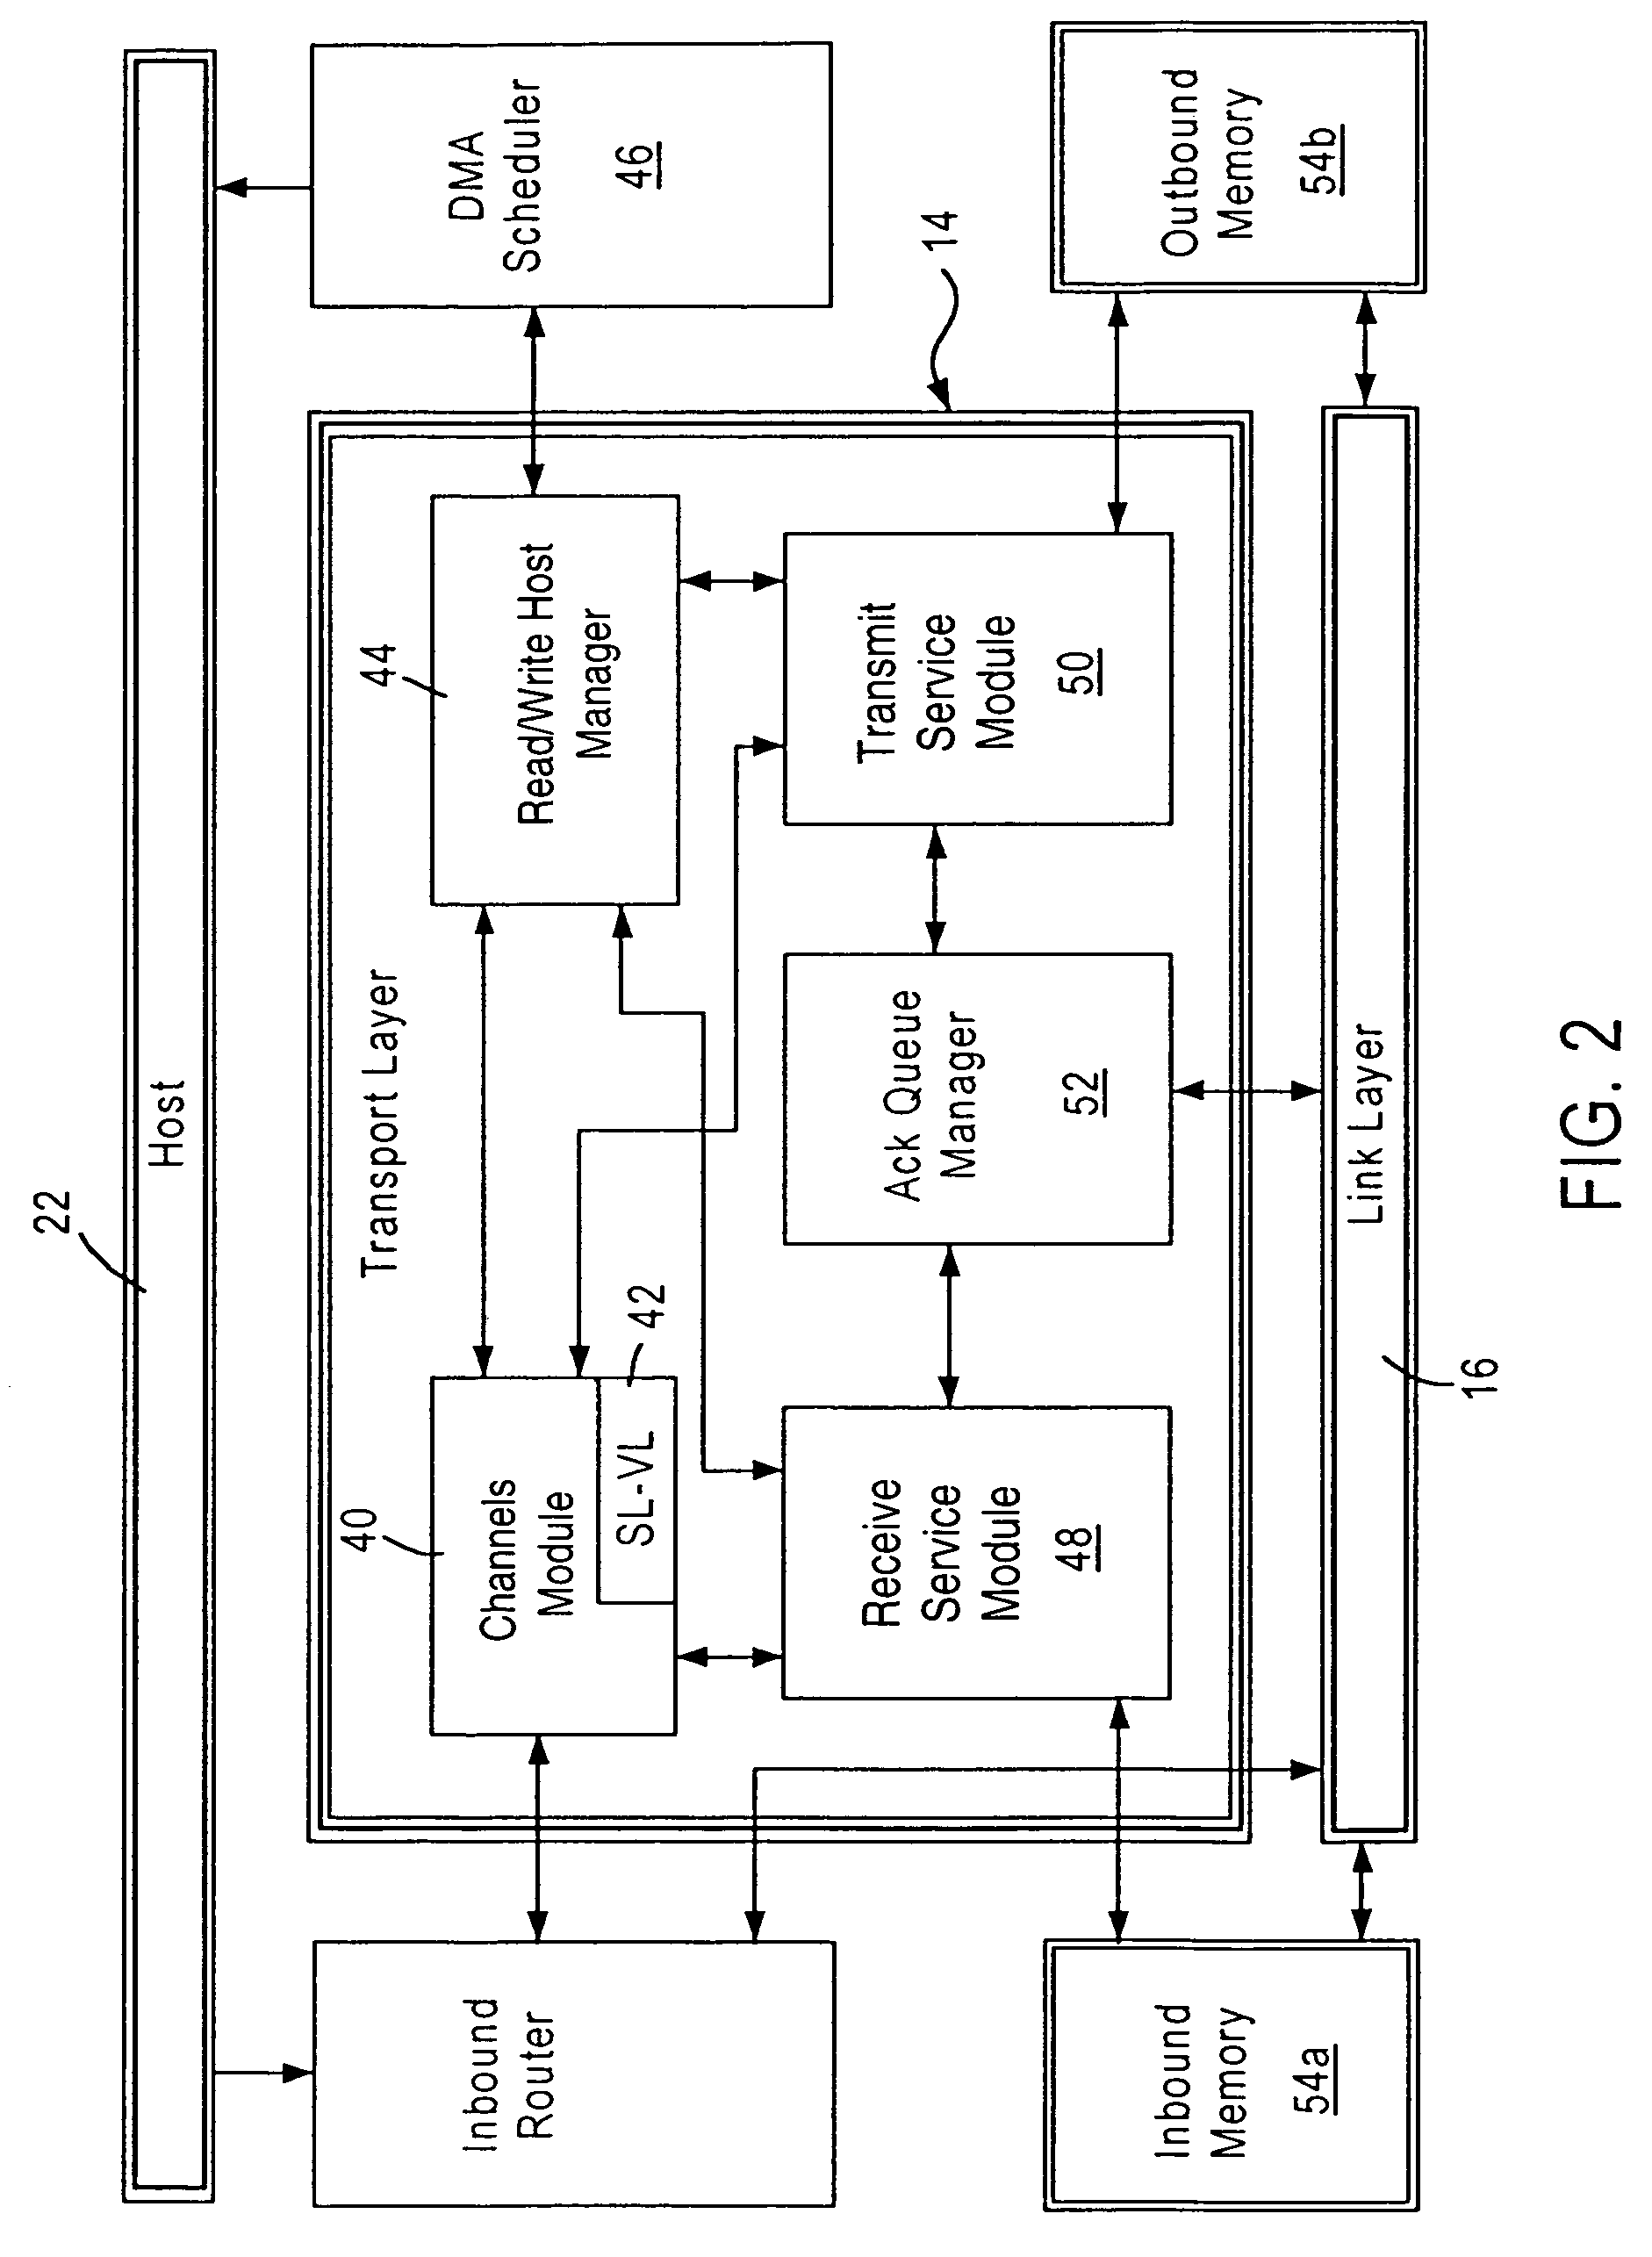 Arrangement in a channel adapter for servicing work notifications based on link layer virtual lane processing